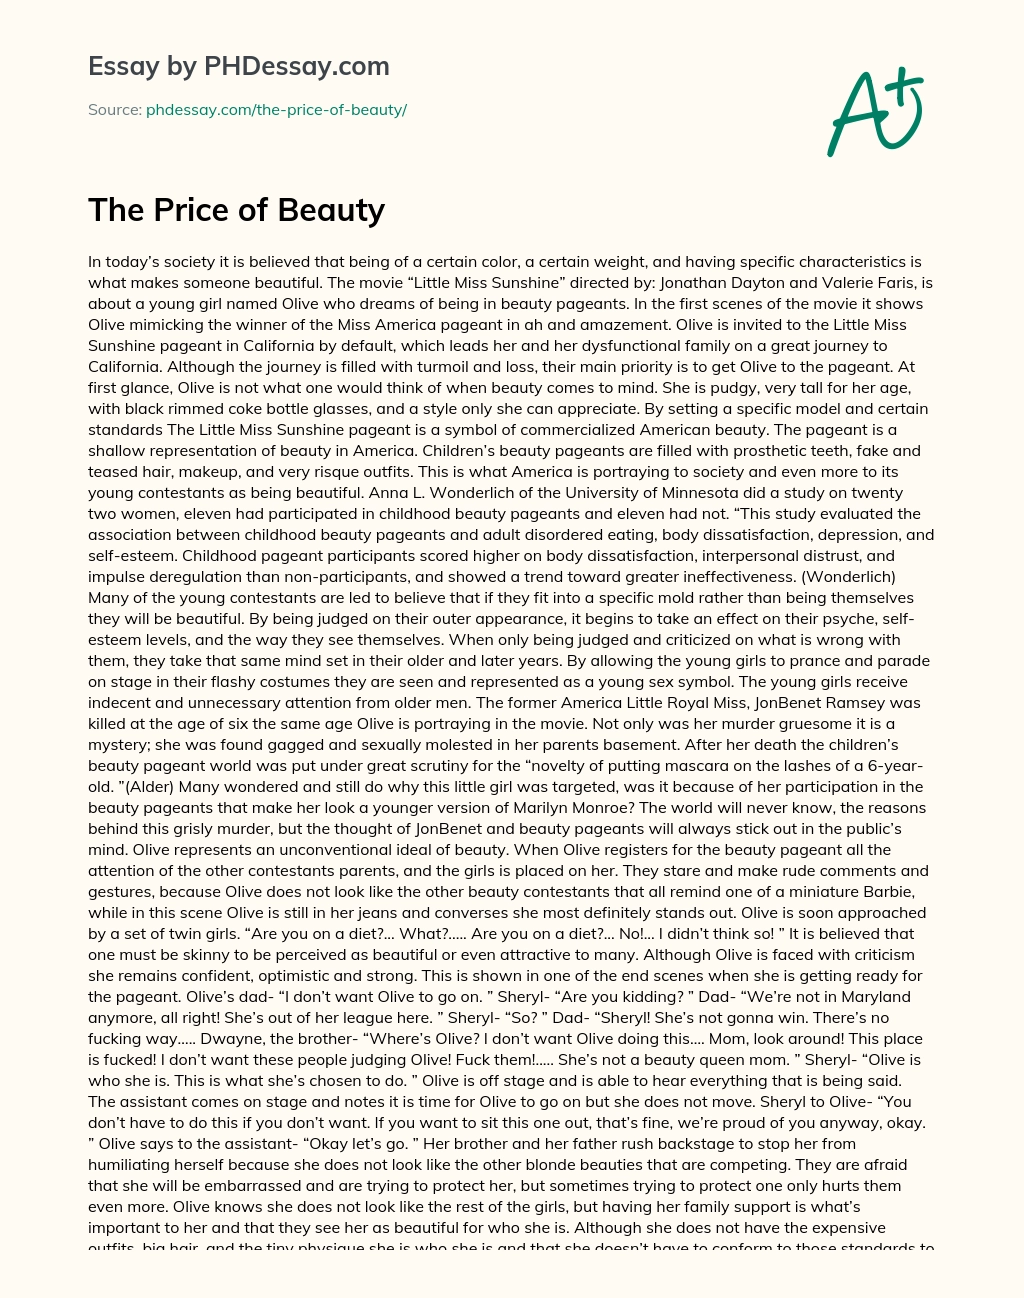 The Price of Beauty essay